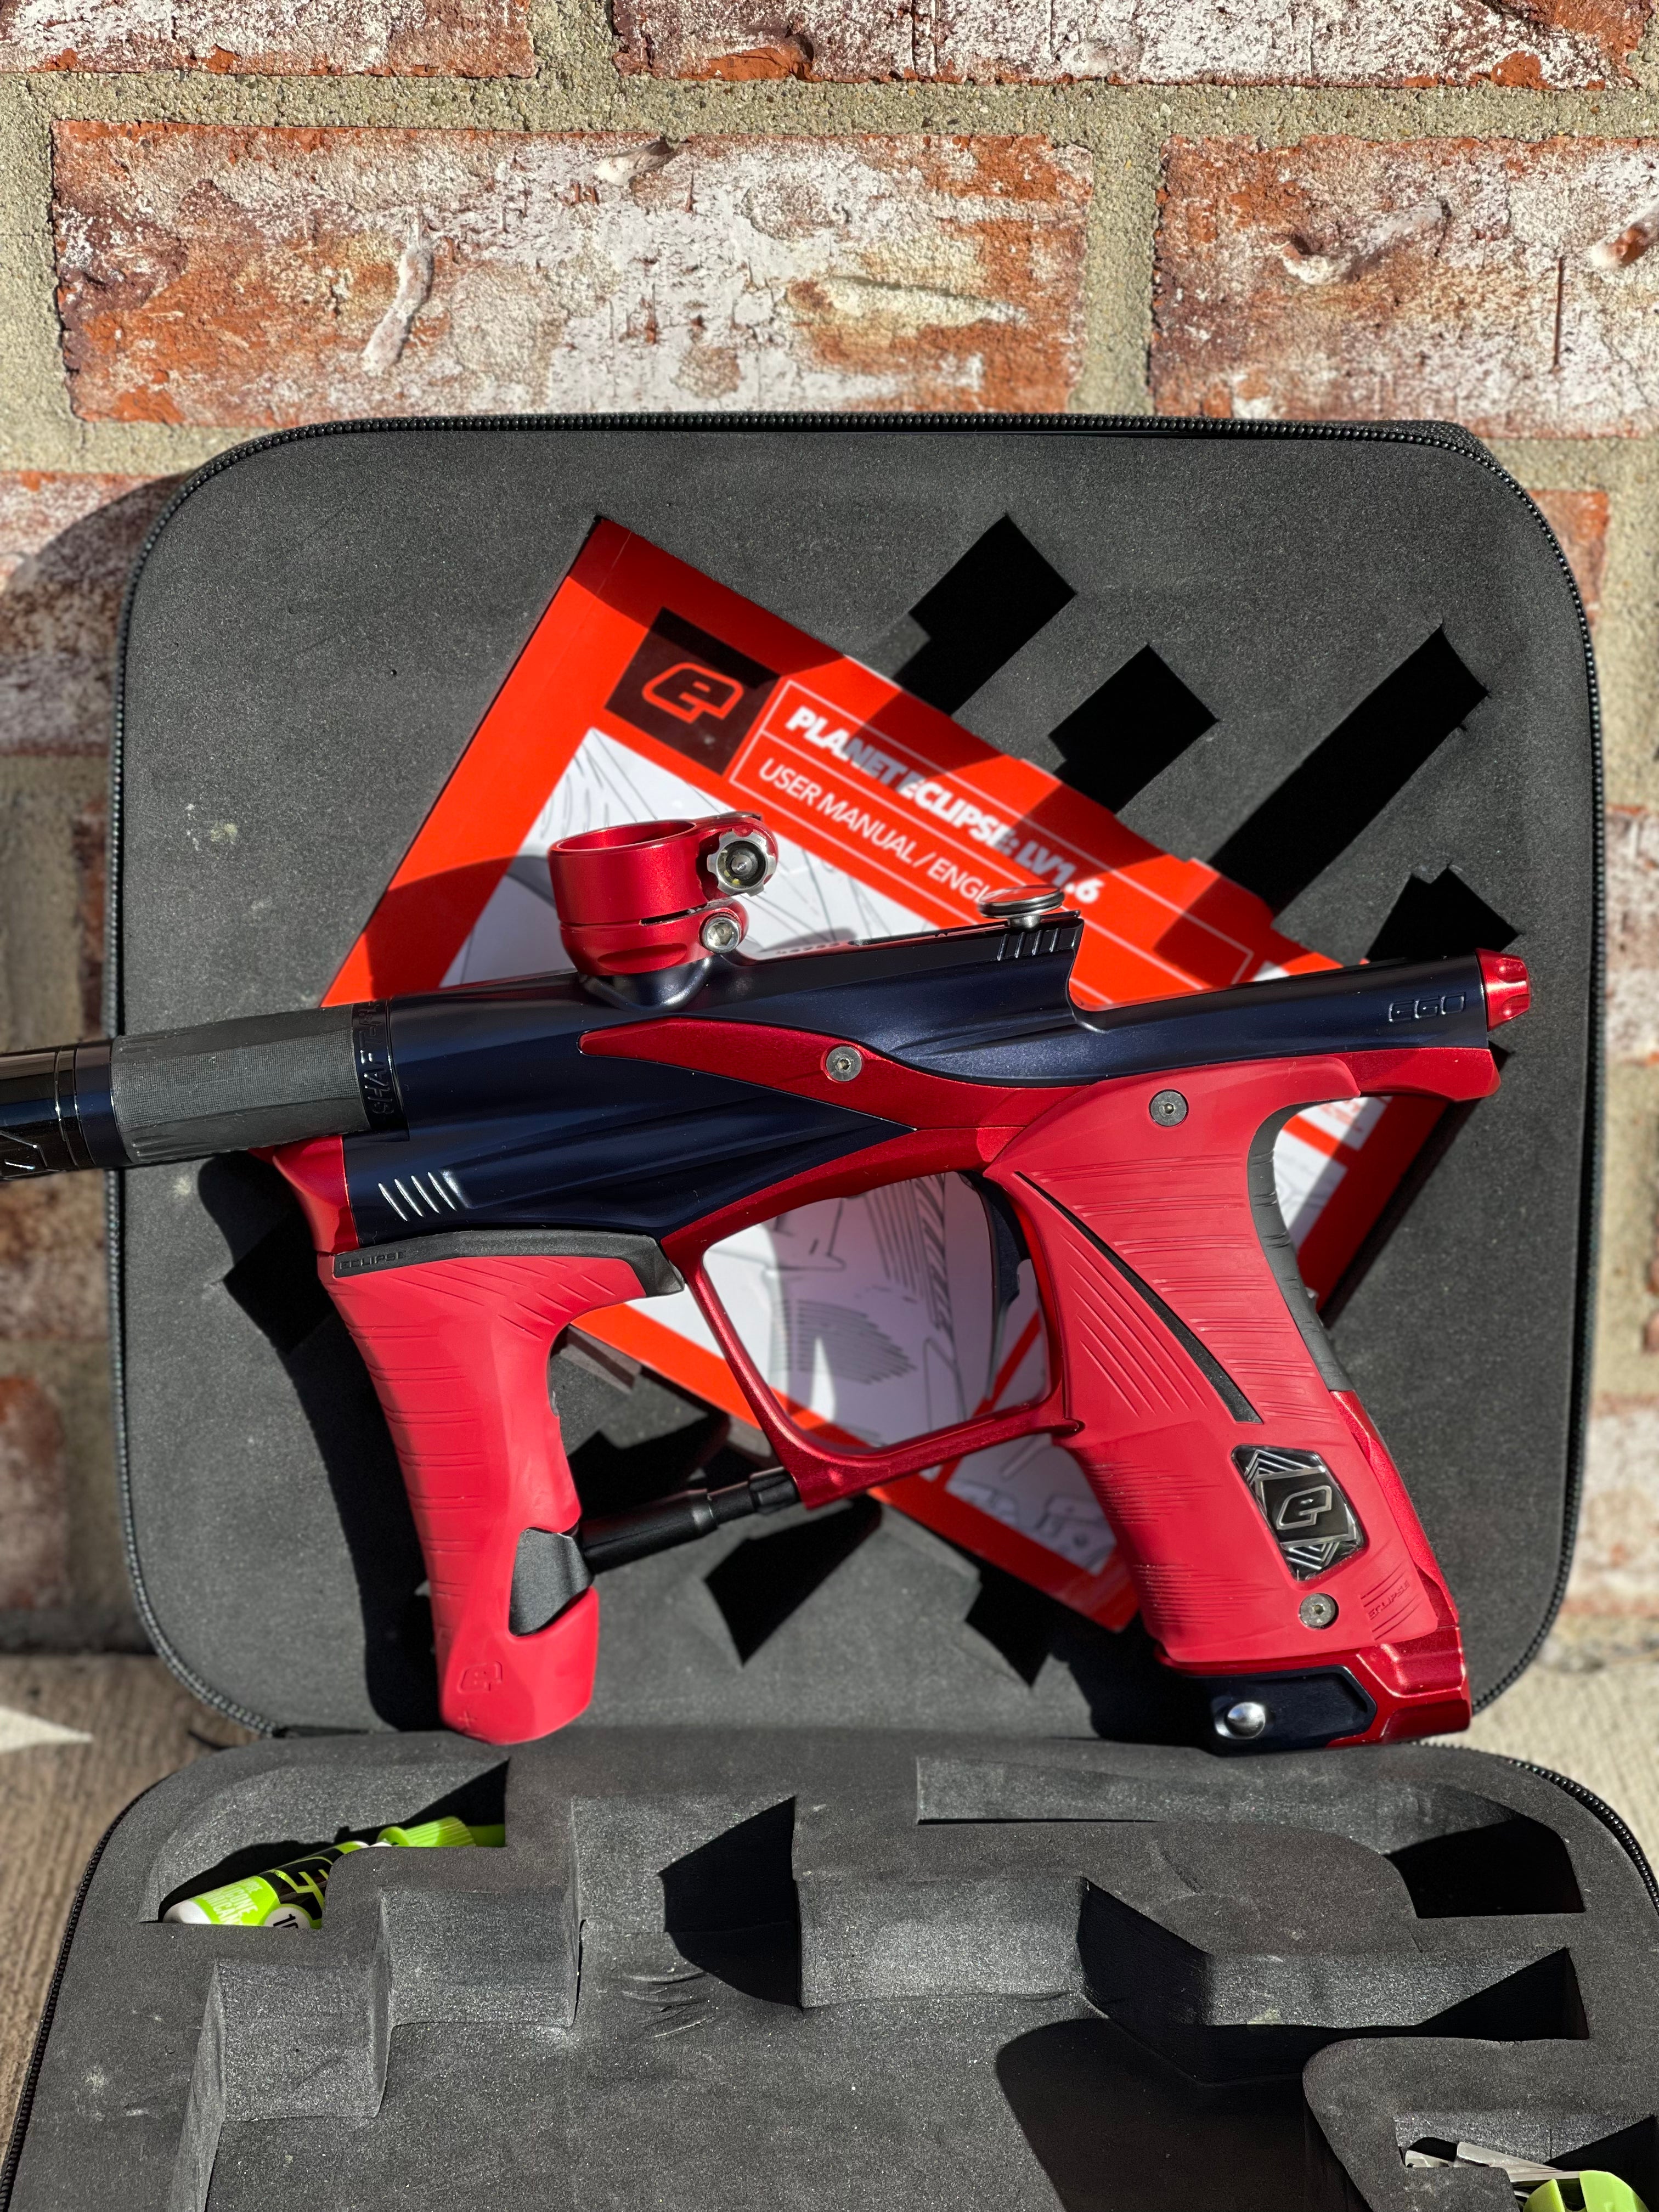 Planet Eclipse Ego LV1.6 LV Series Grip Kit Red - Paintball Revolution